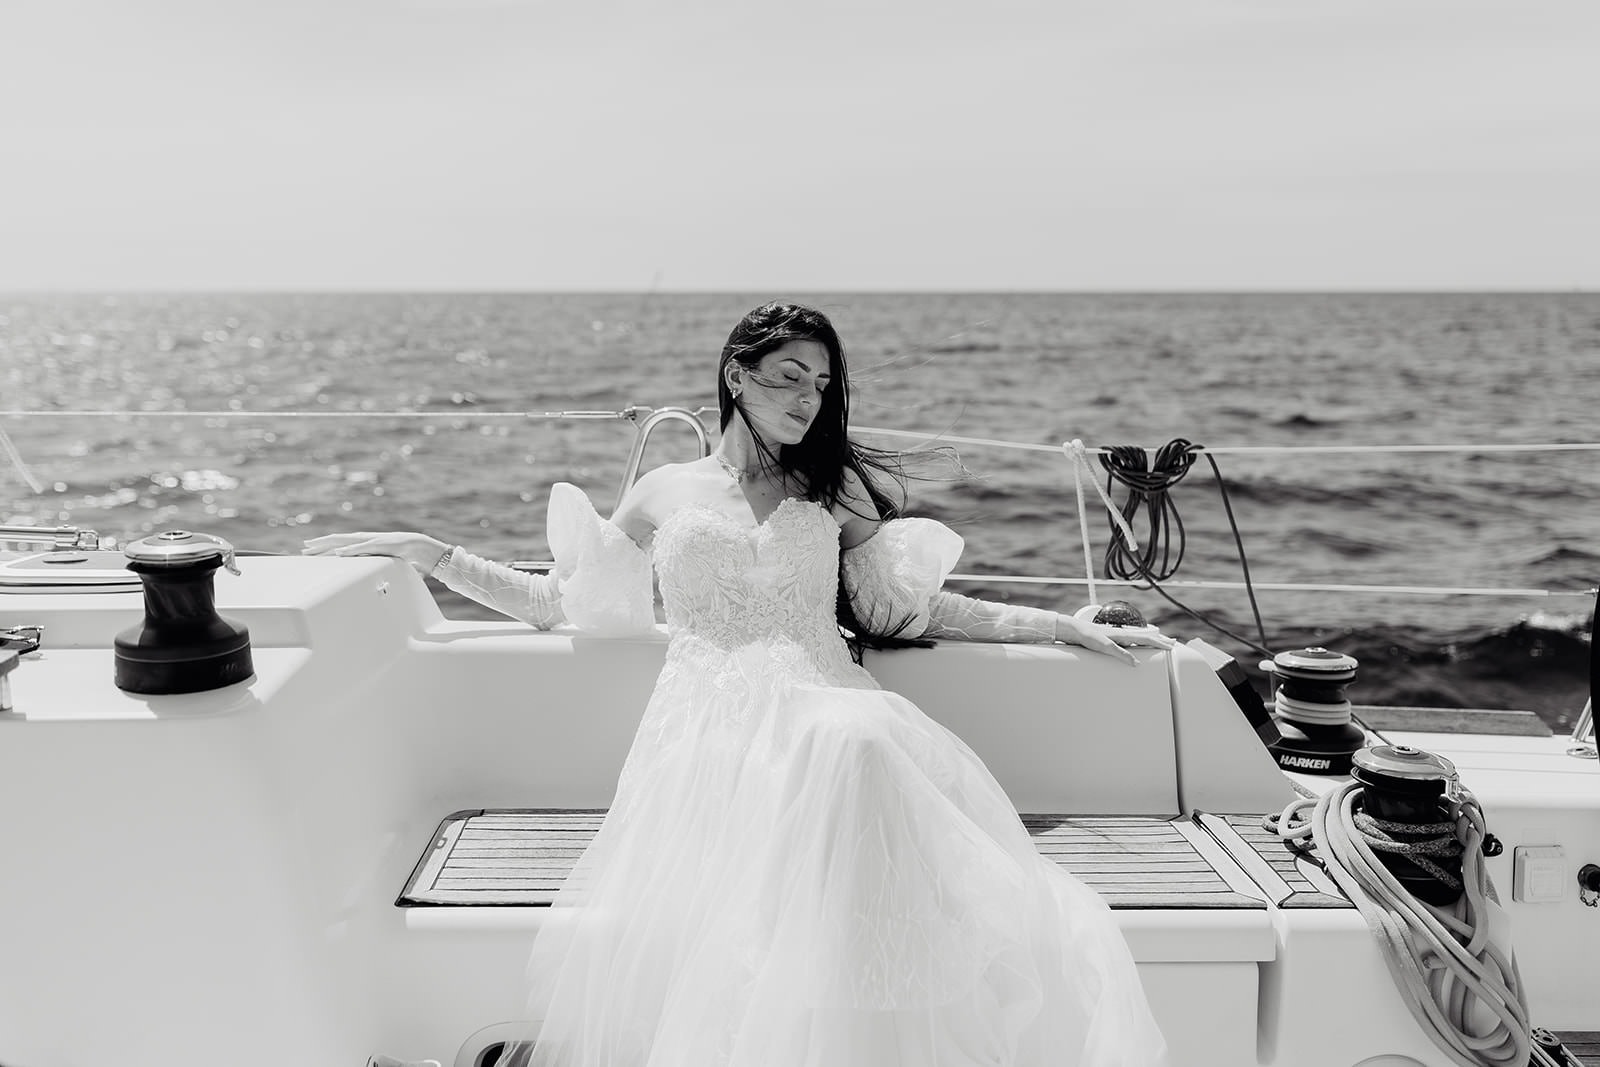 Bride on a boat at a French riviera wedding